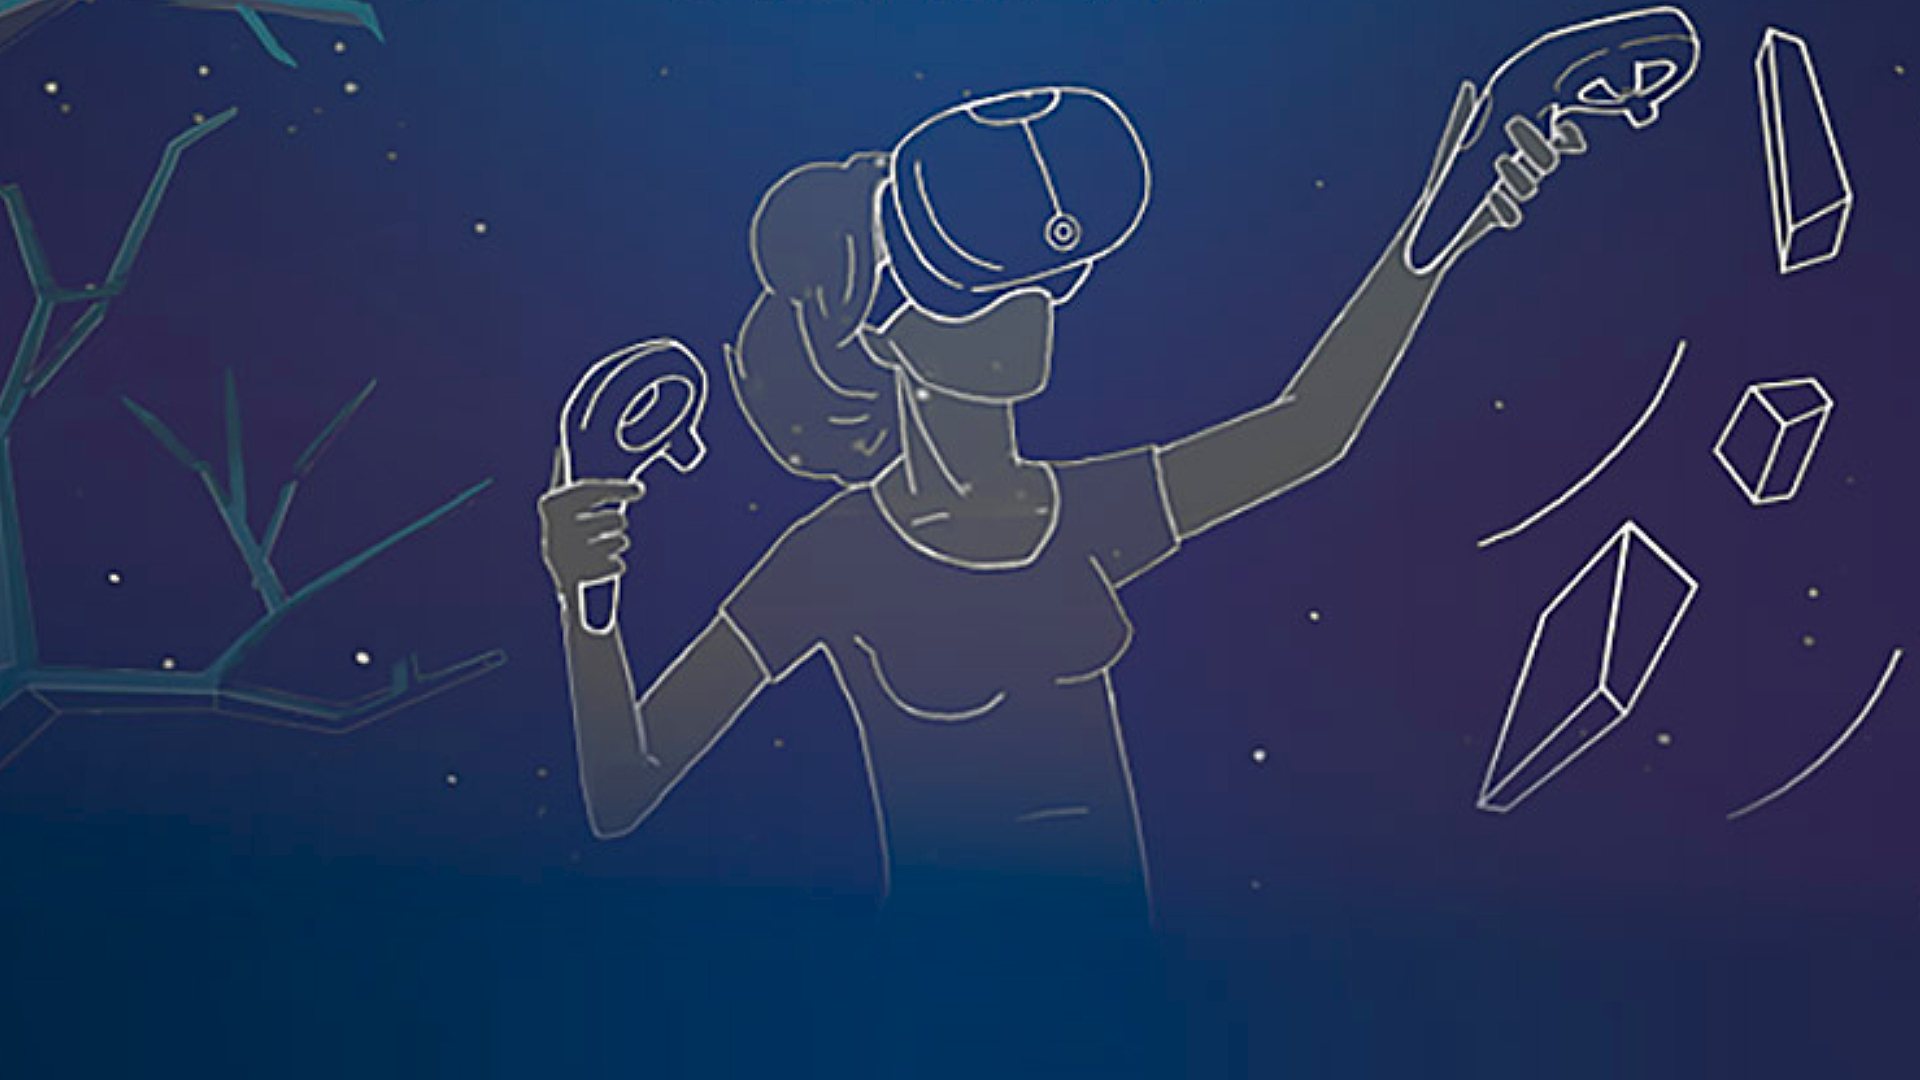 Oculus Quest 2: SteamVR illustration with a woman presenting an outline illustration of a user playing with a headset